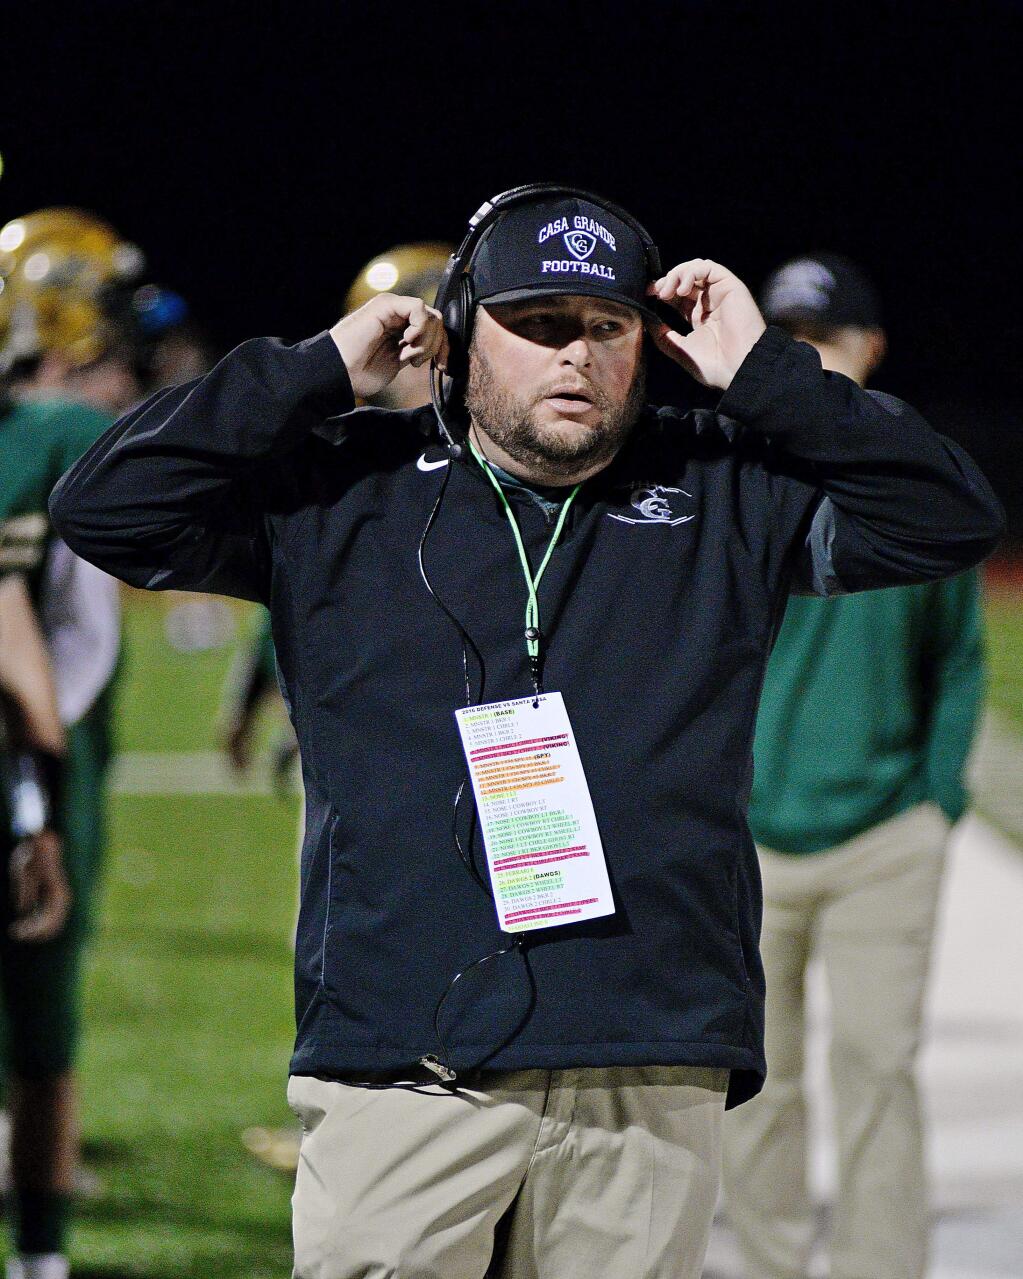 SUMNER FOWLER/FOR THE ARGUS-COURIERCasa Grande High School head football coach Trent Herzog did not have his contract renewed. He was later replaced by Denis Brunk.